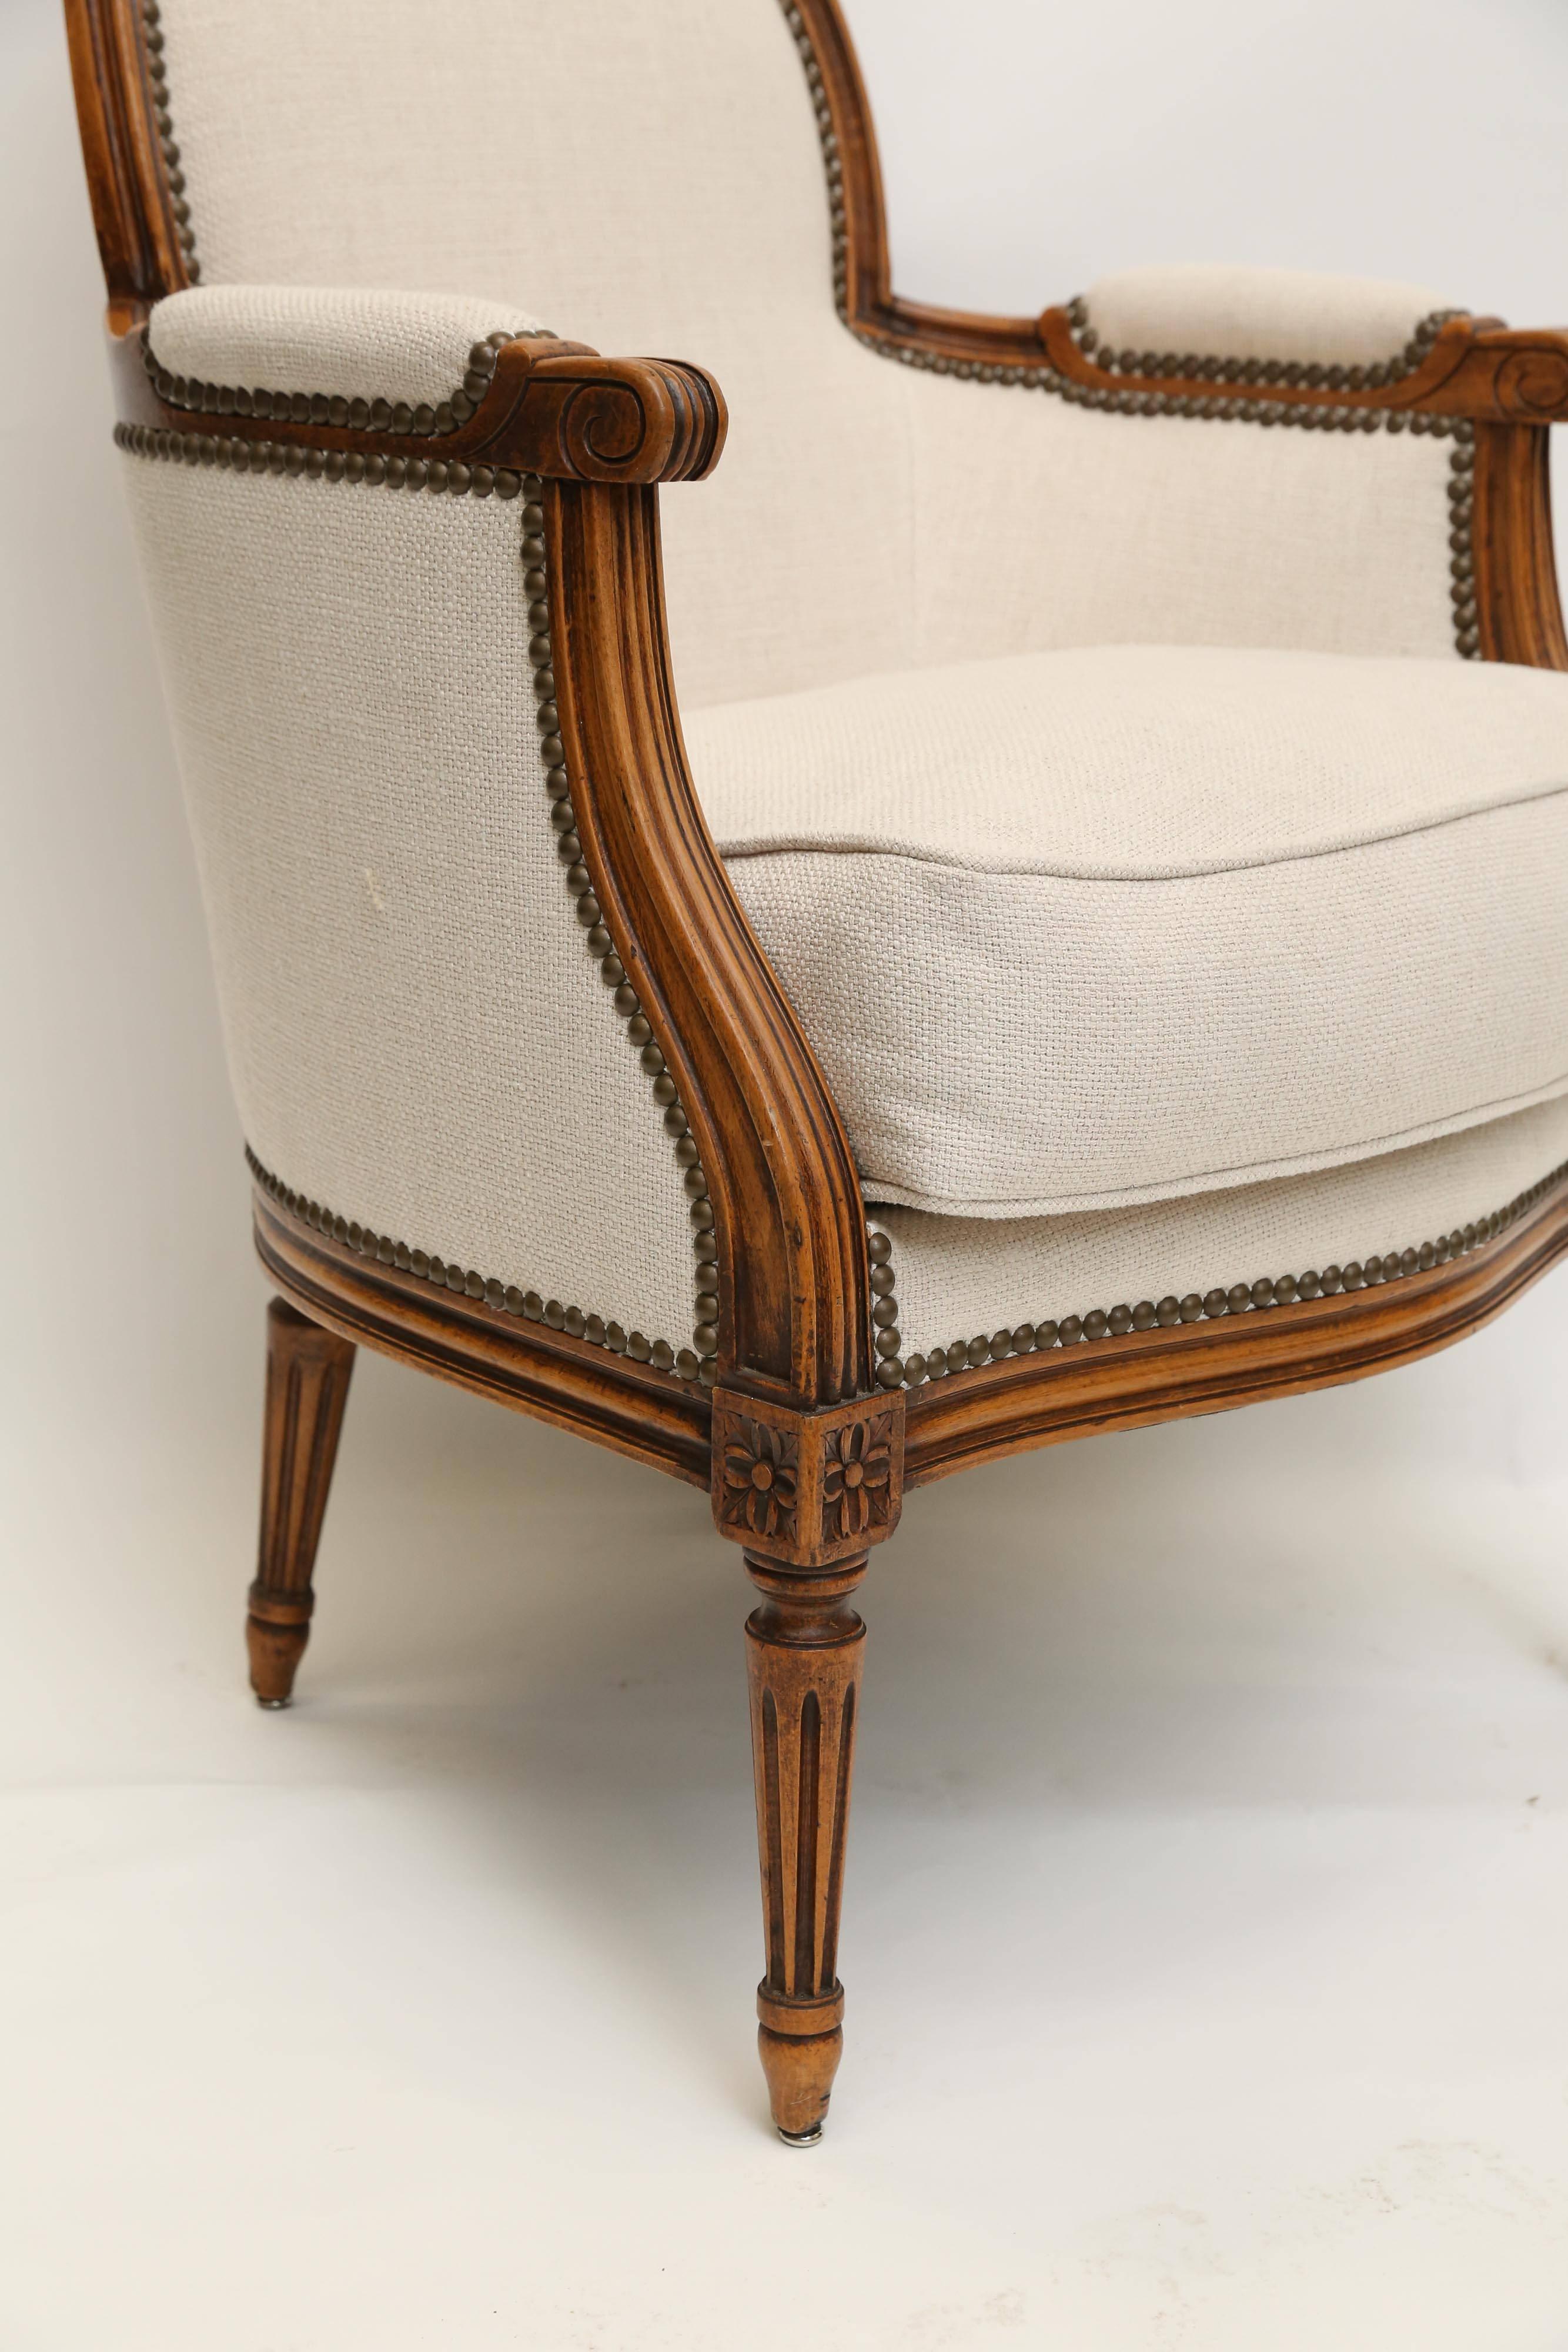 A striking Bergere chair from France. Newly upholstered in a white linen blend with brass nail heads, this small scale Bergere has beautiful proportions and a unique warmth. 